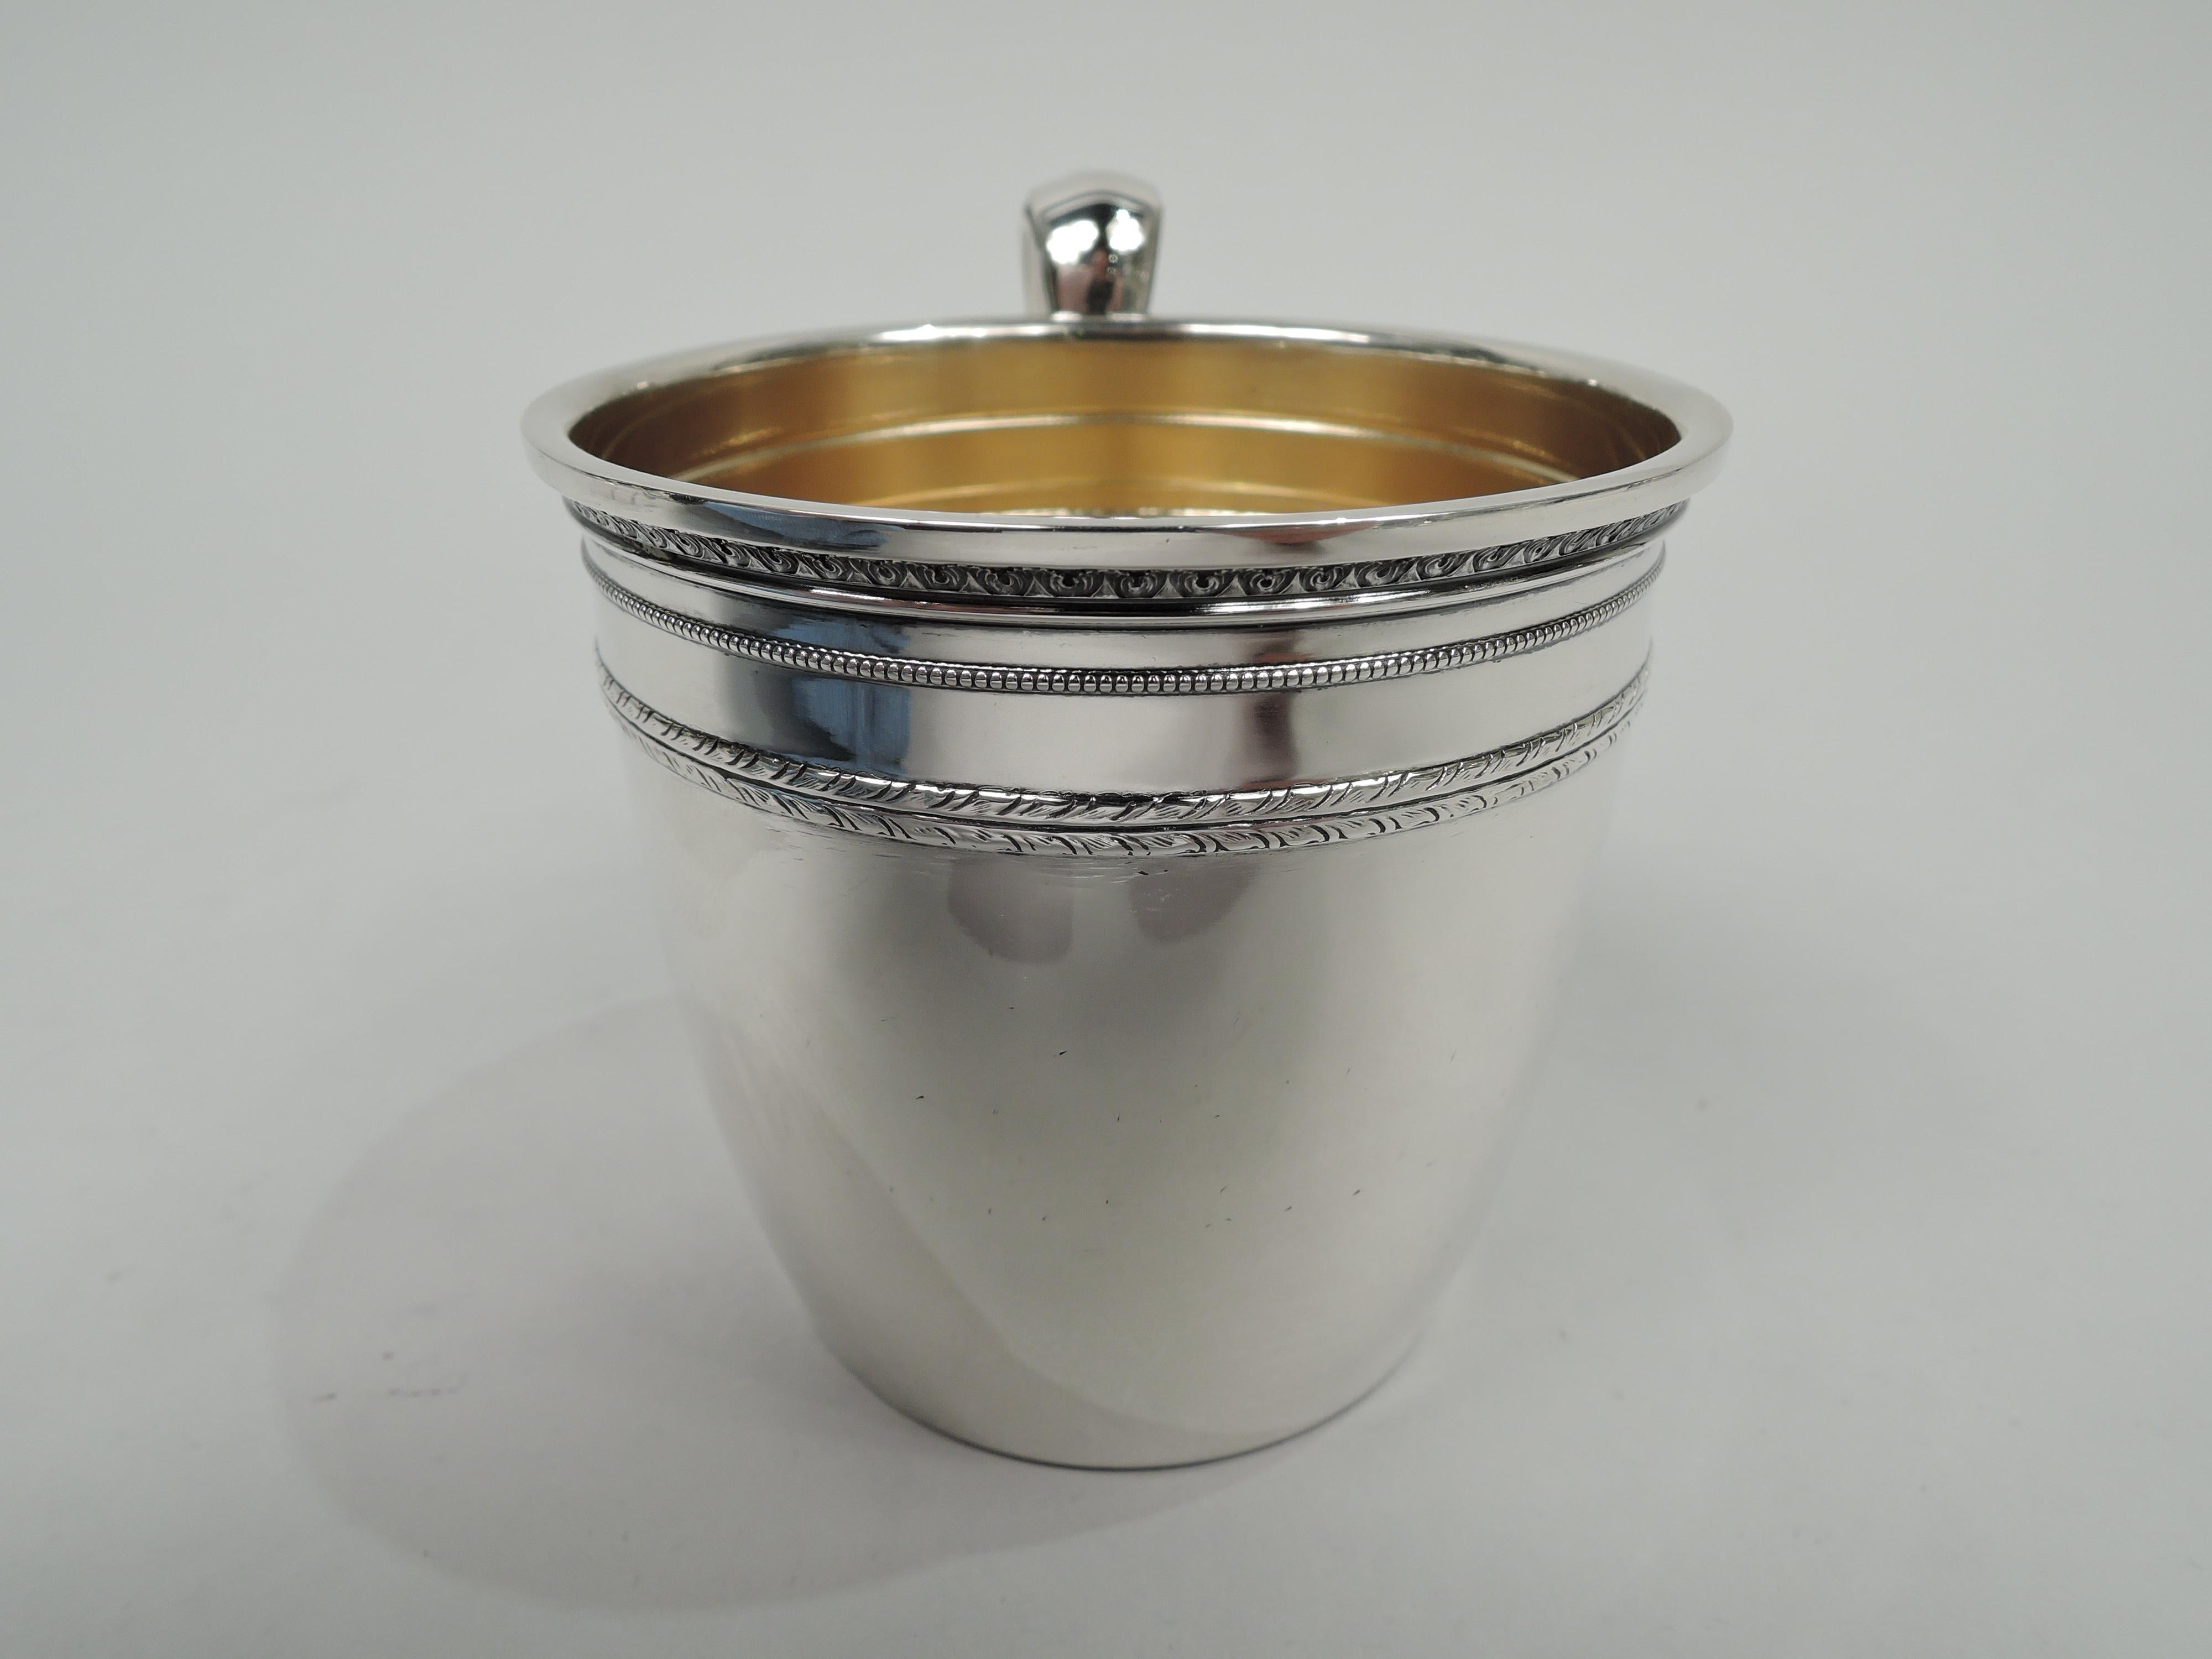 Edgeworth sterling silver baby cup. Made by Gorham in Providence in 1923. Gently curved and tapering sides and leaf-mounted and capped high-looping handle. Neoclassical ornamental bands including leaf and dart and beading. Gilt-washed interior.